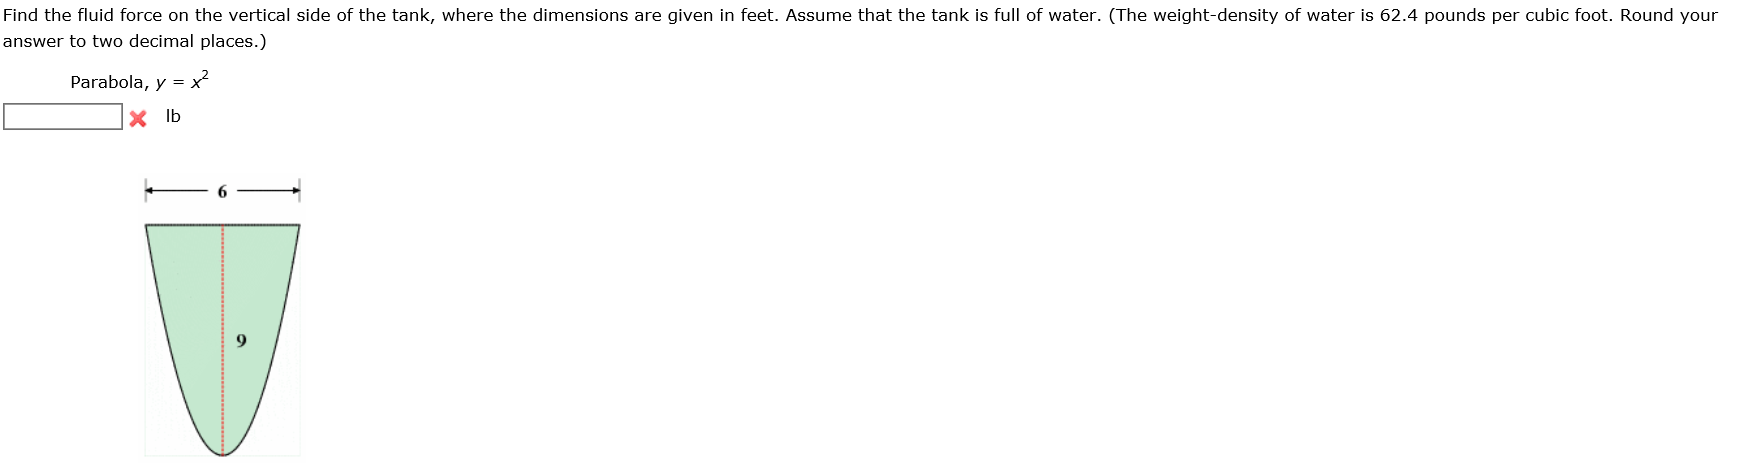 find the fluid force on the vertical side of the tank with a semicircle with a height of 2